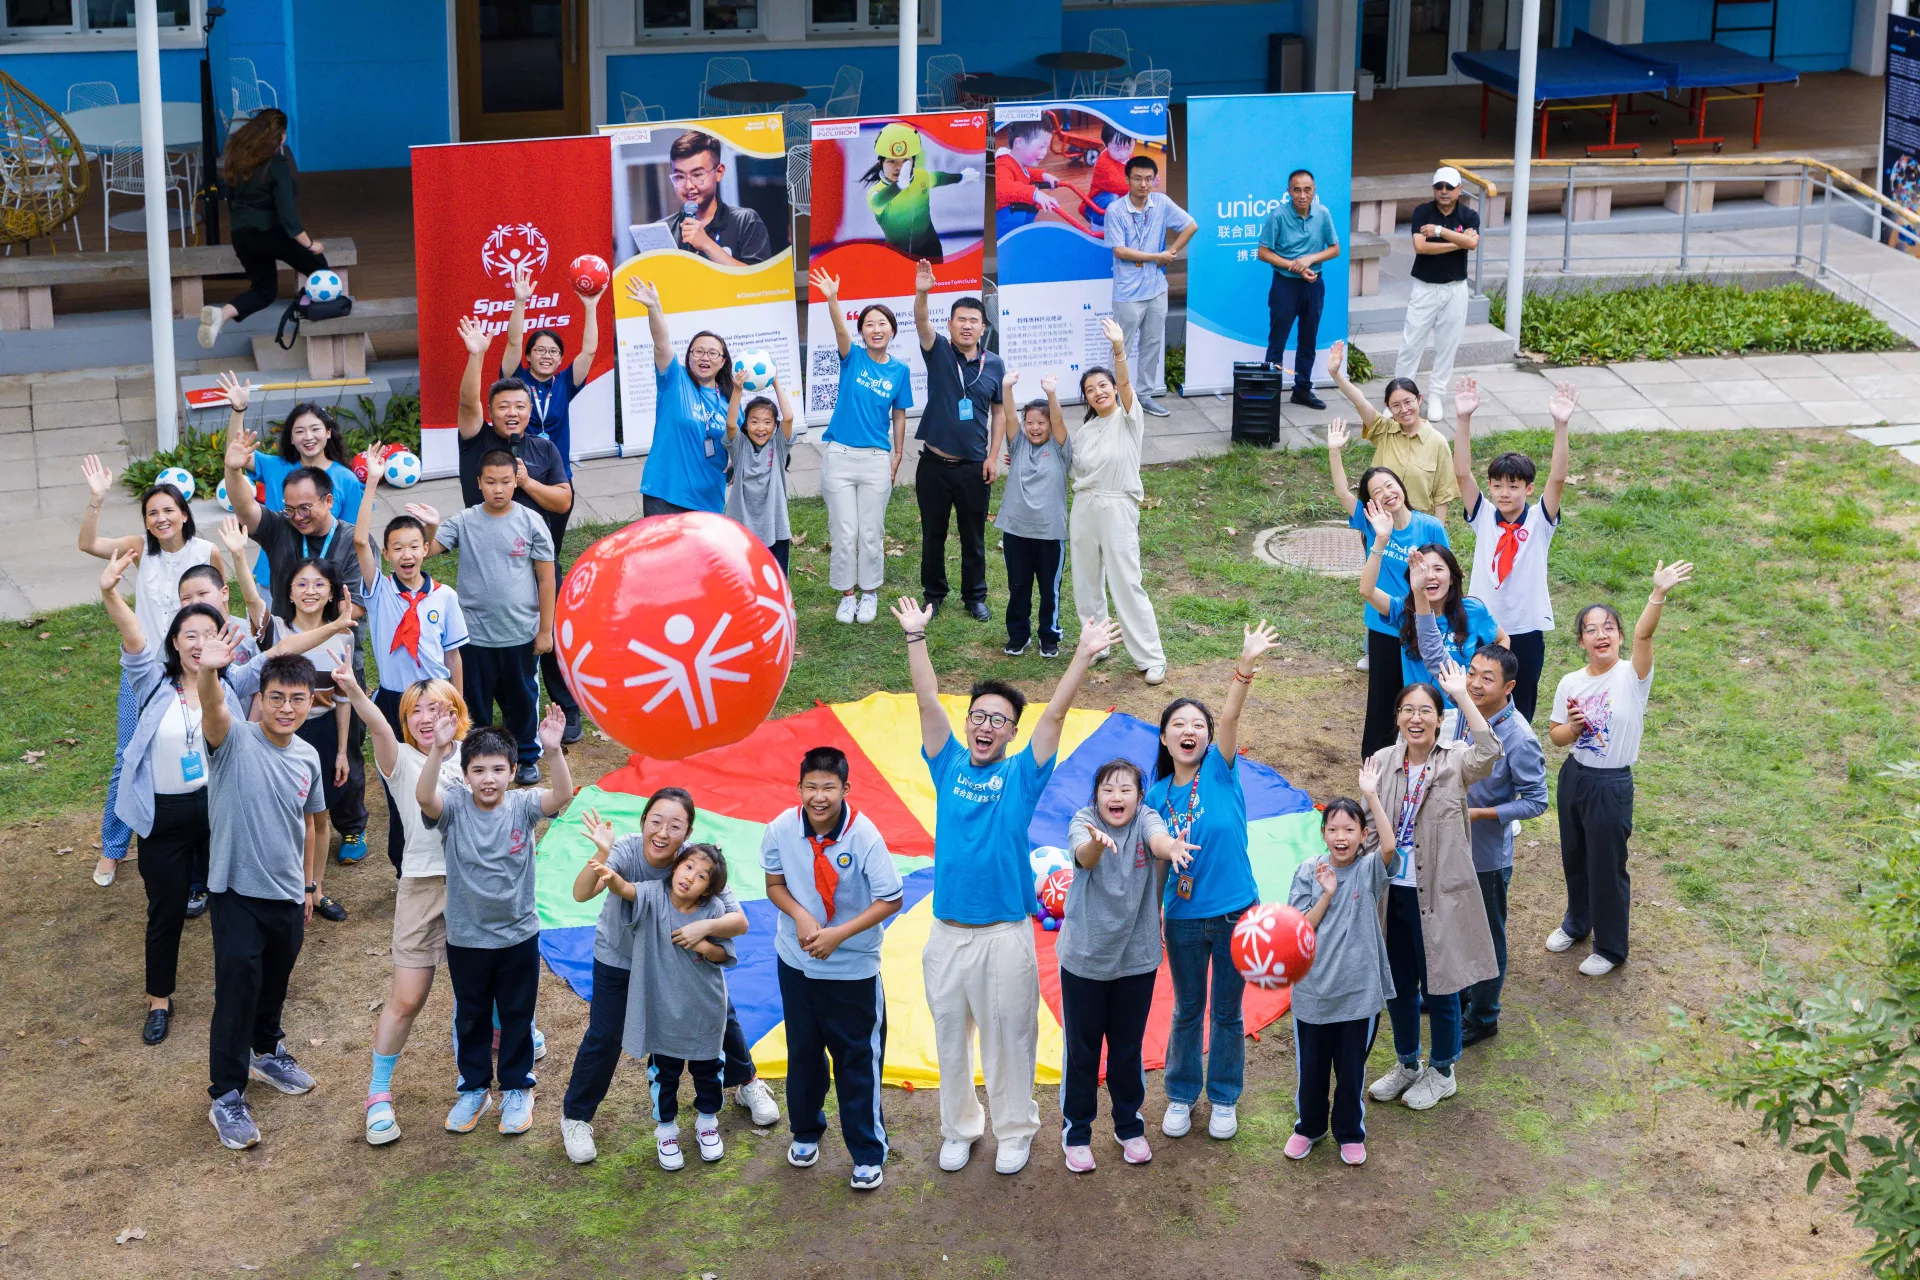 Participants cheer together in UNICEF China's green space after the event.